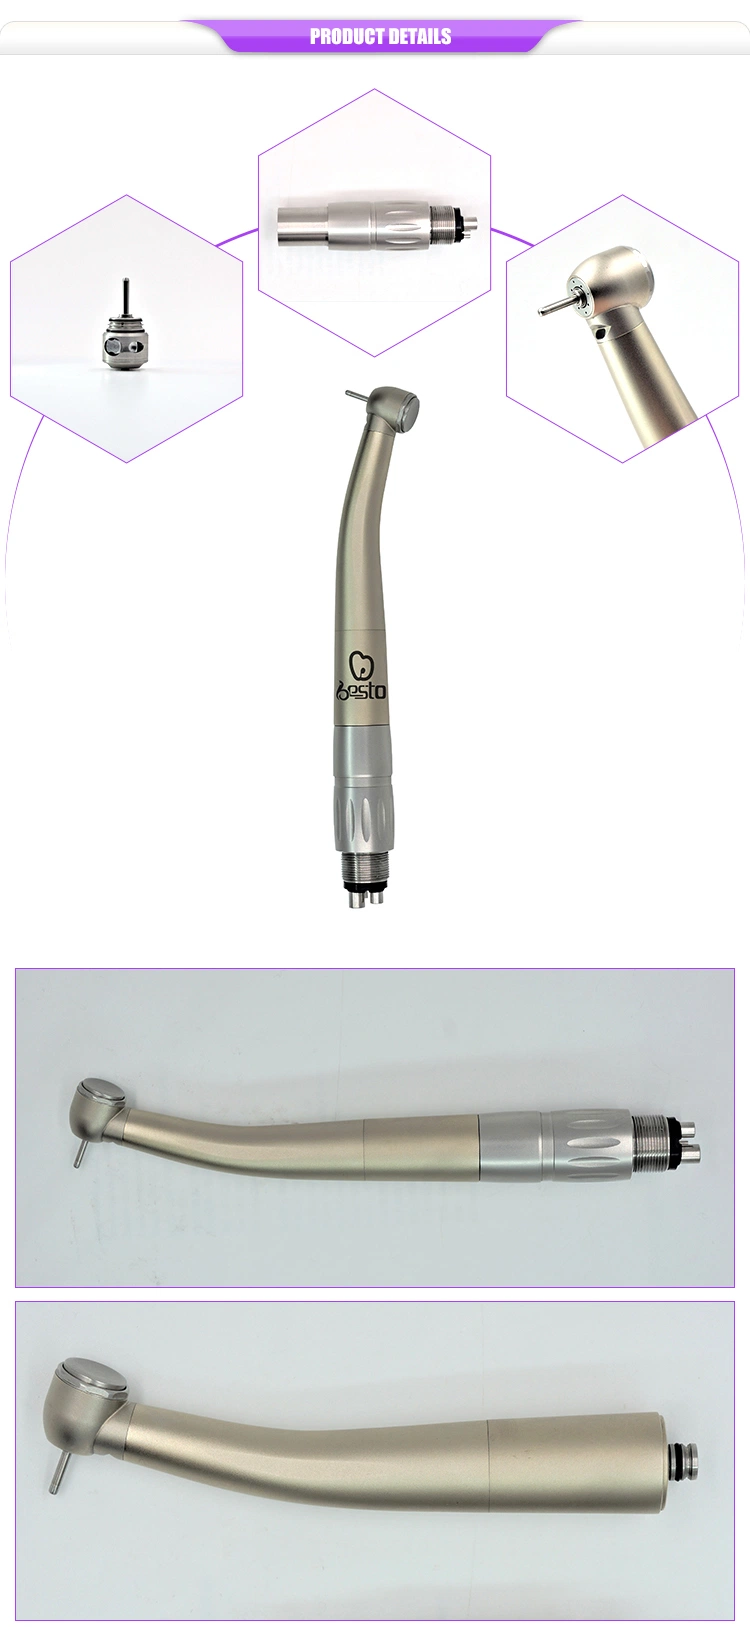 Chinese High Speed Fiber Optic Dental Handpiece for Sale 6 Hole Coupling NSK Type